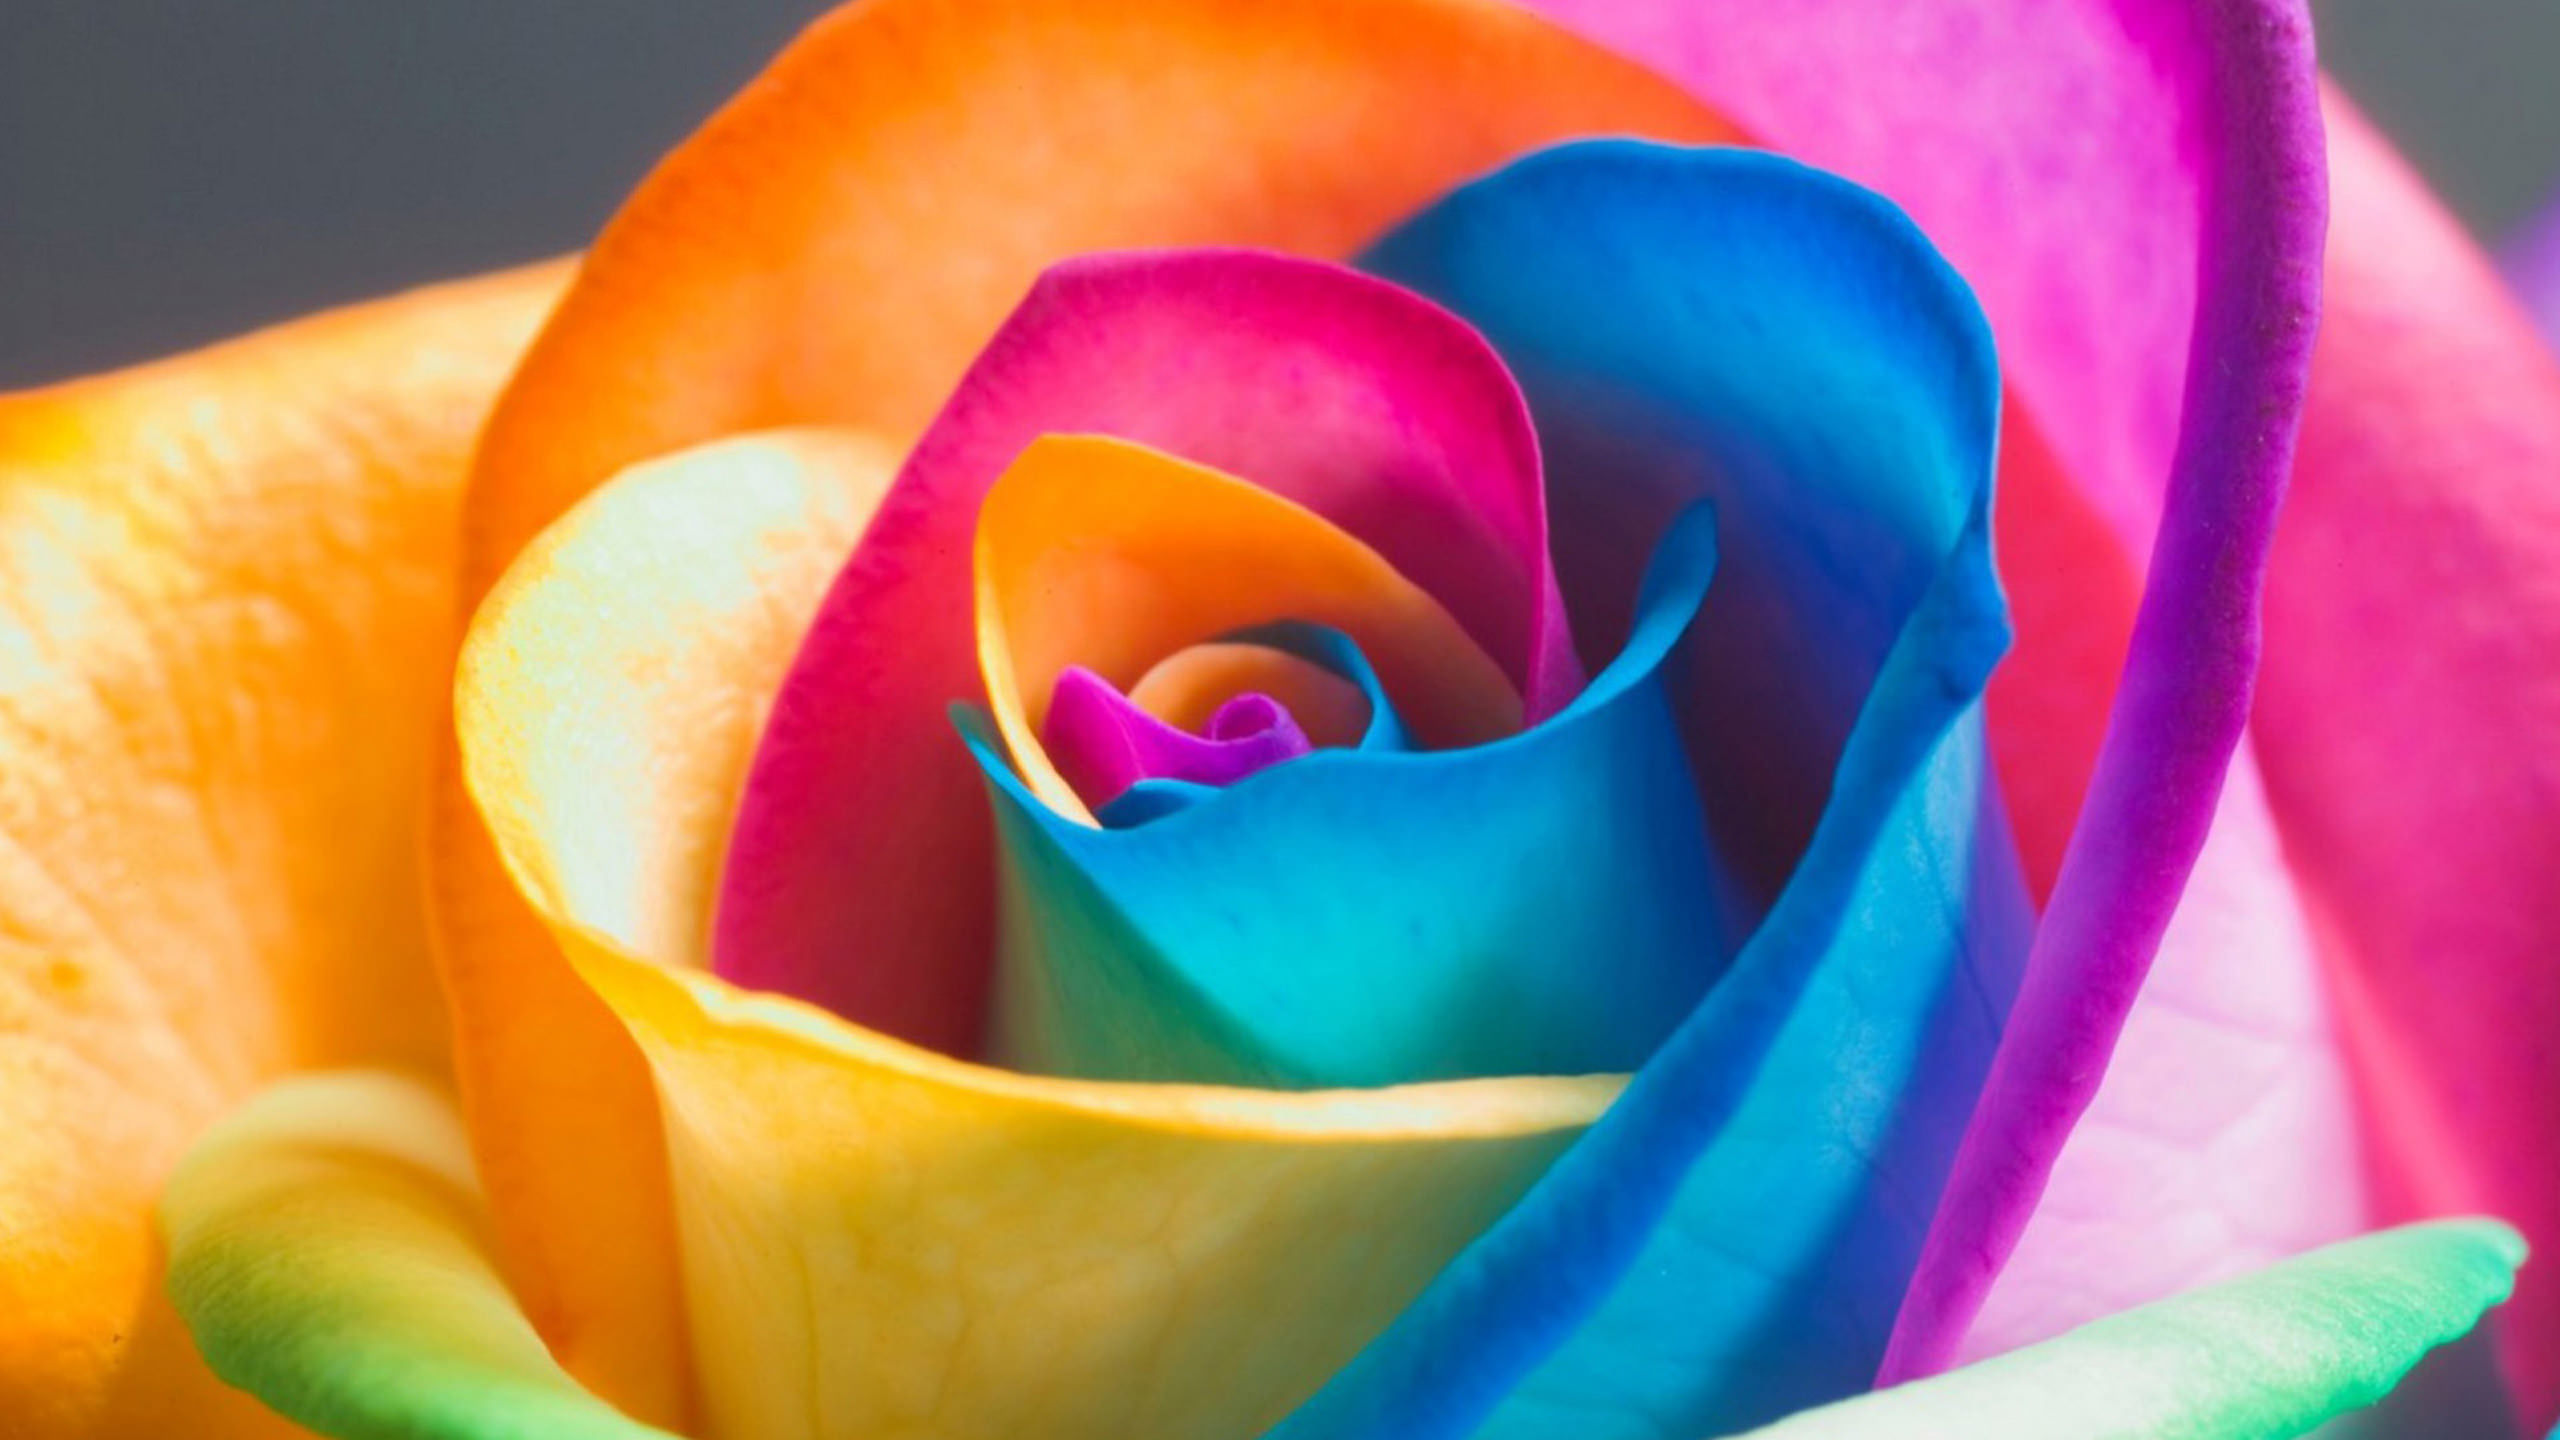 colorful petals image background